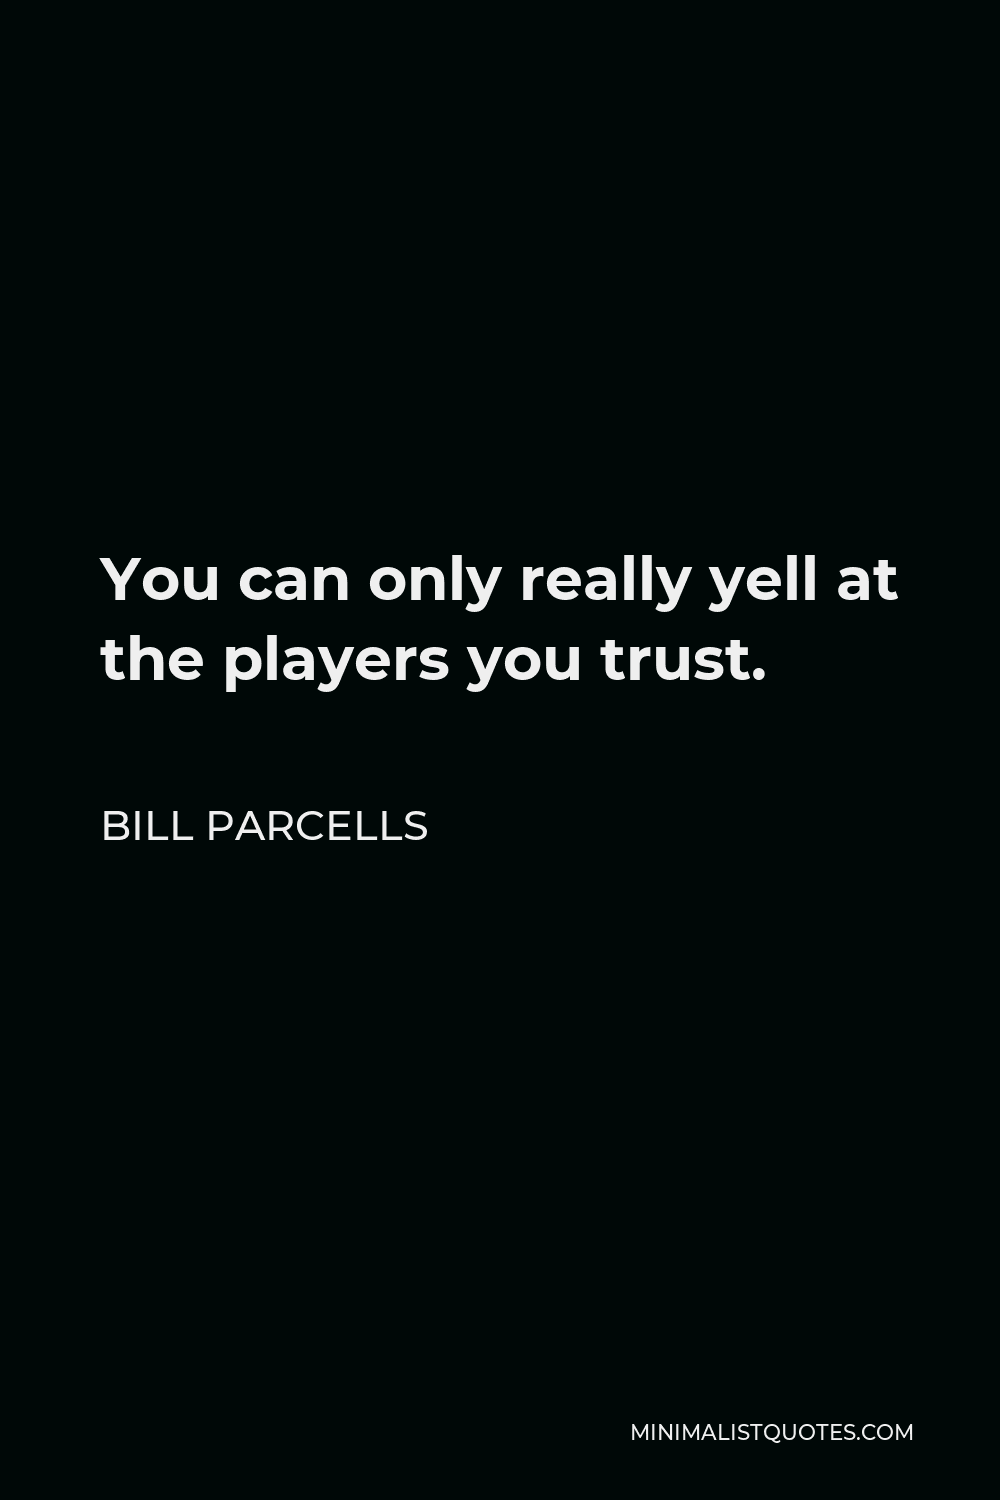 Bill Parcells Quote - You can only really yell at the players you trust.